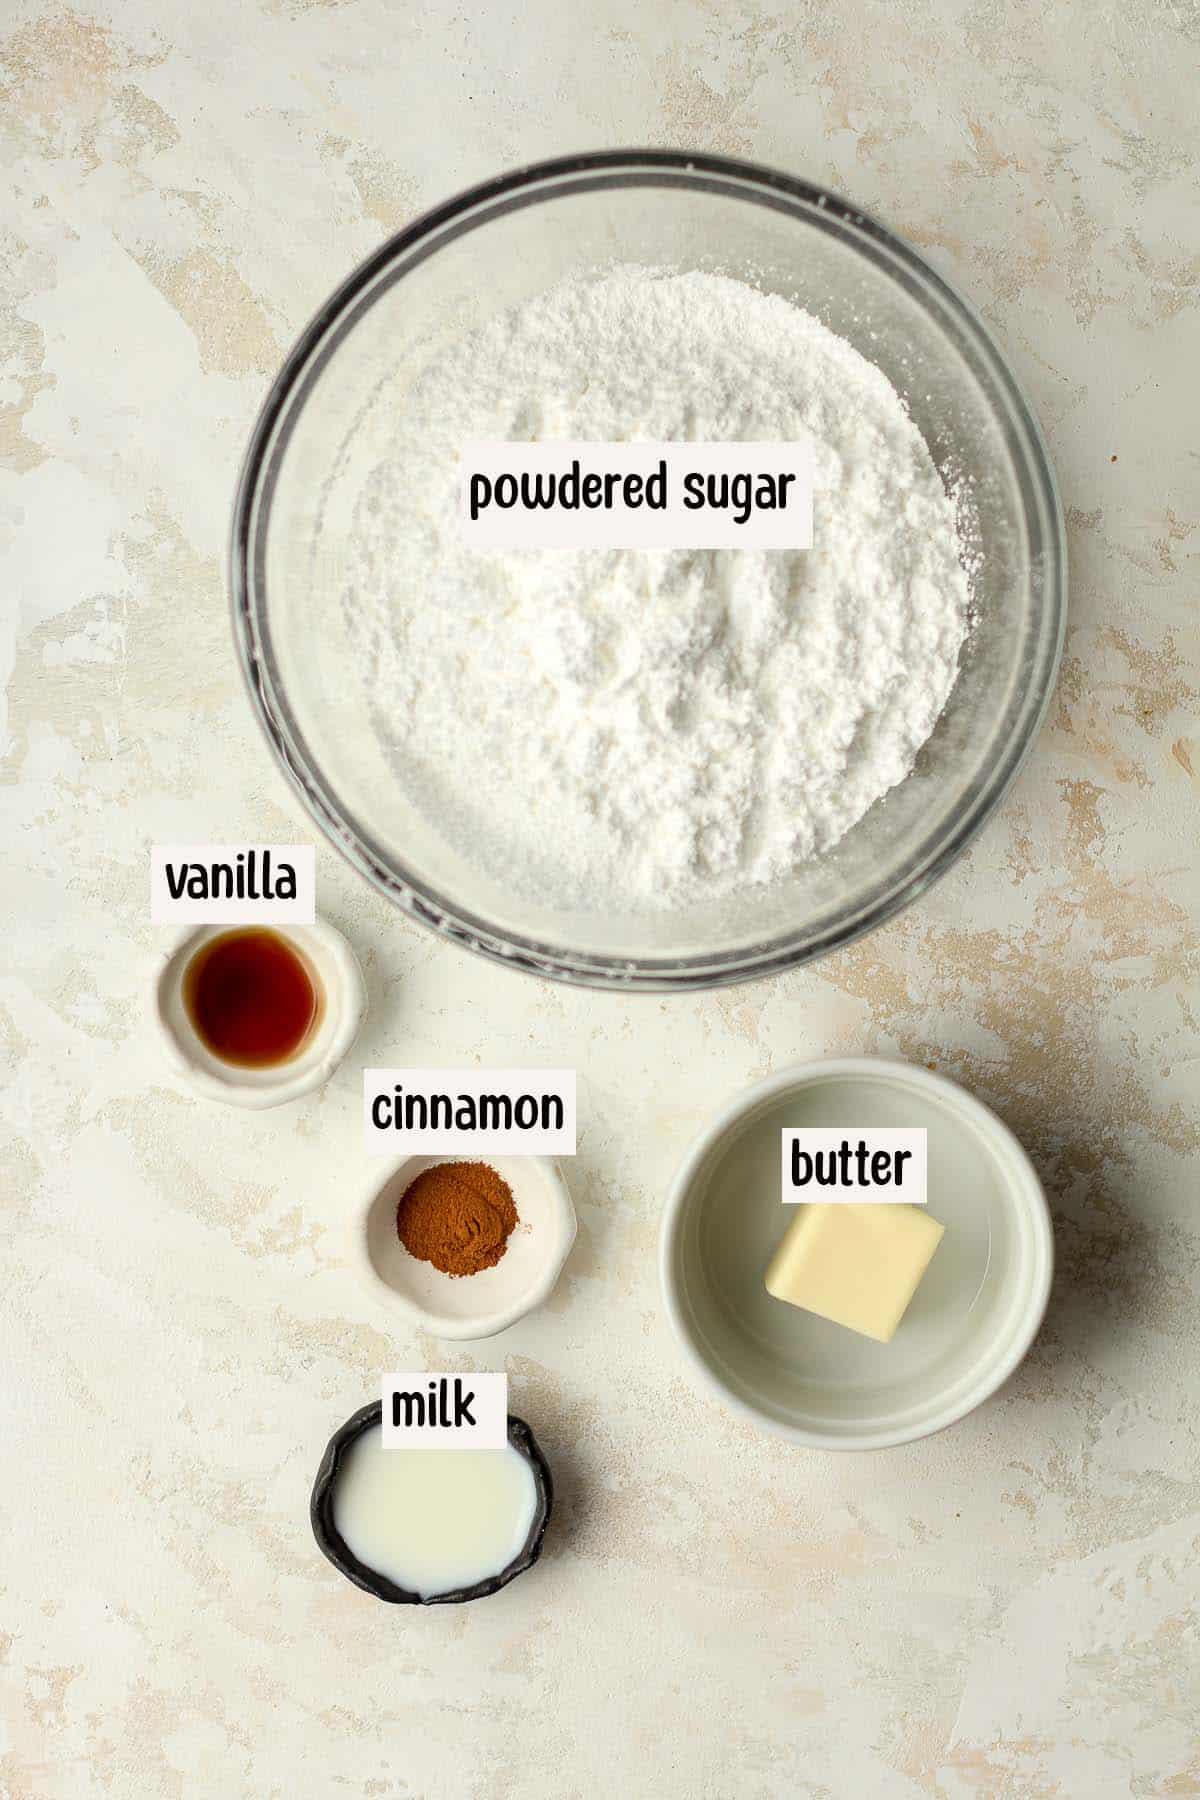 The cinnamon icing ingredients, labeled.